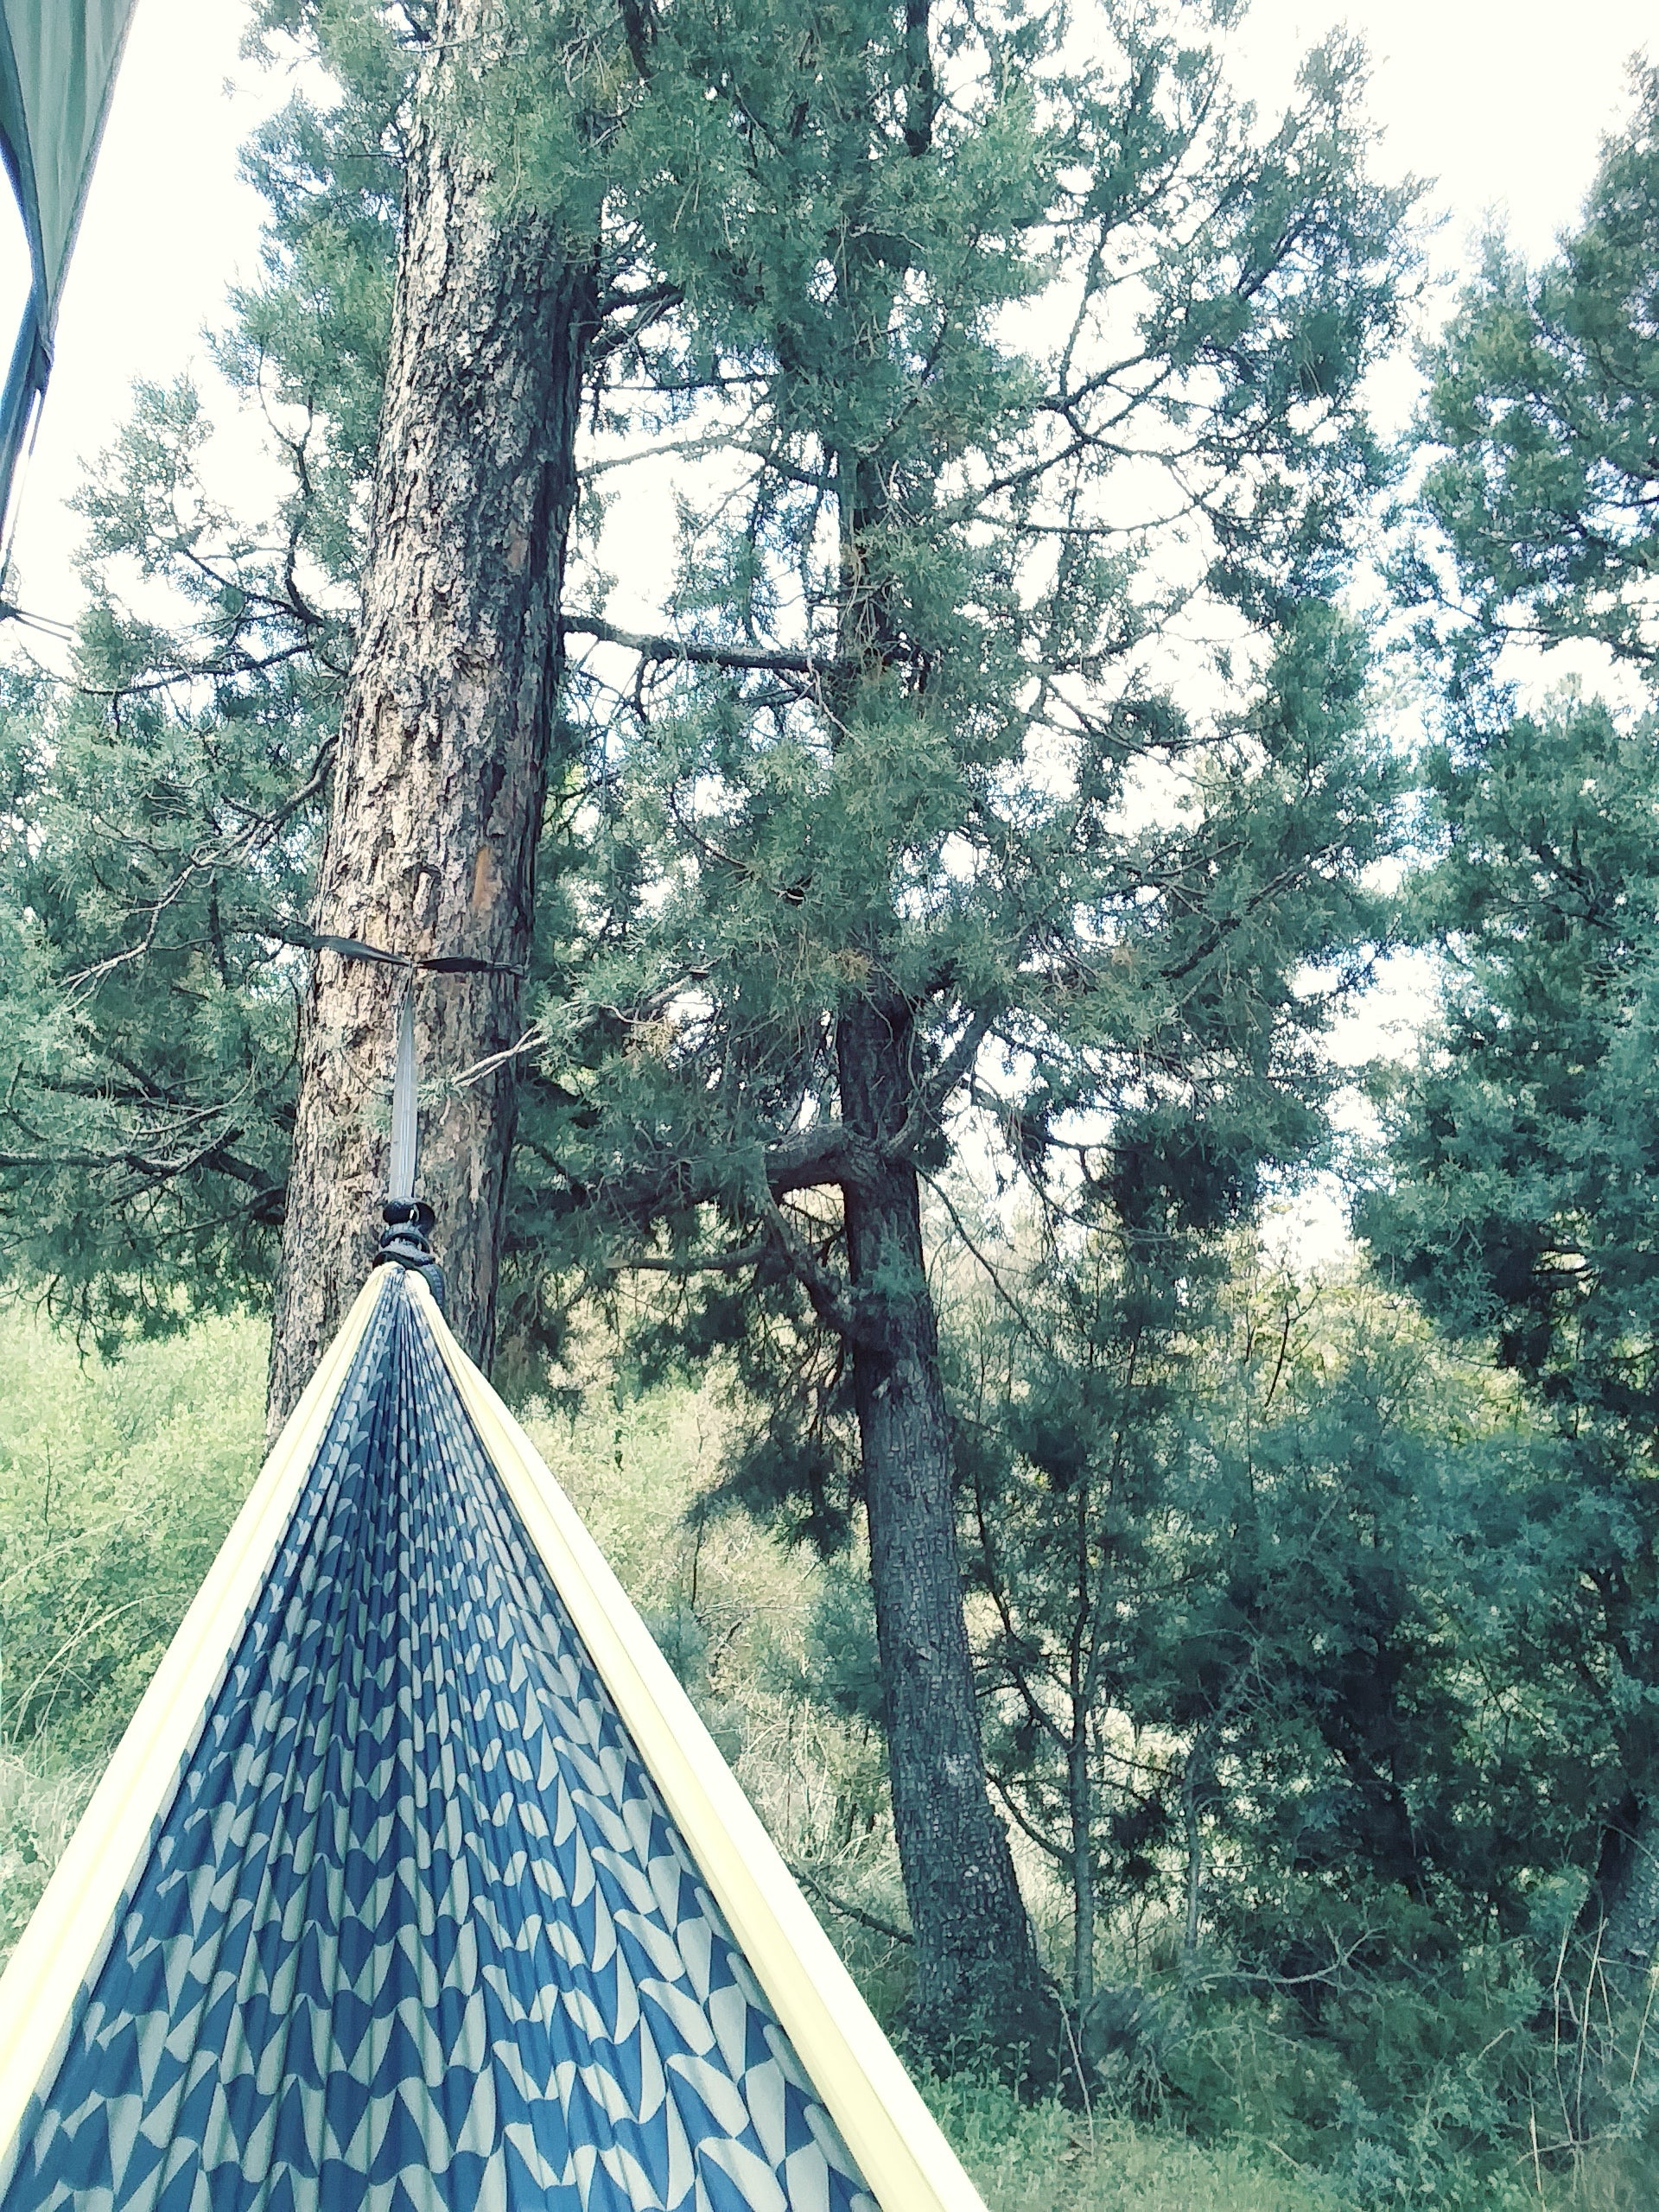 View from my hammock